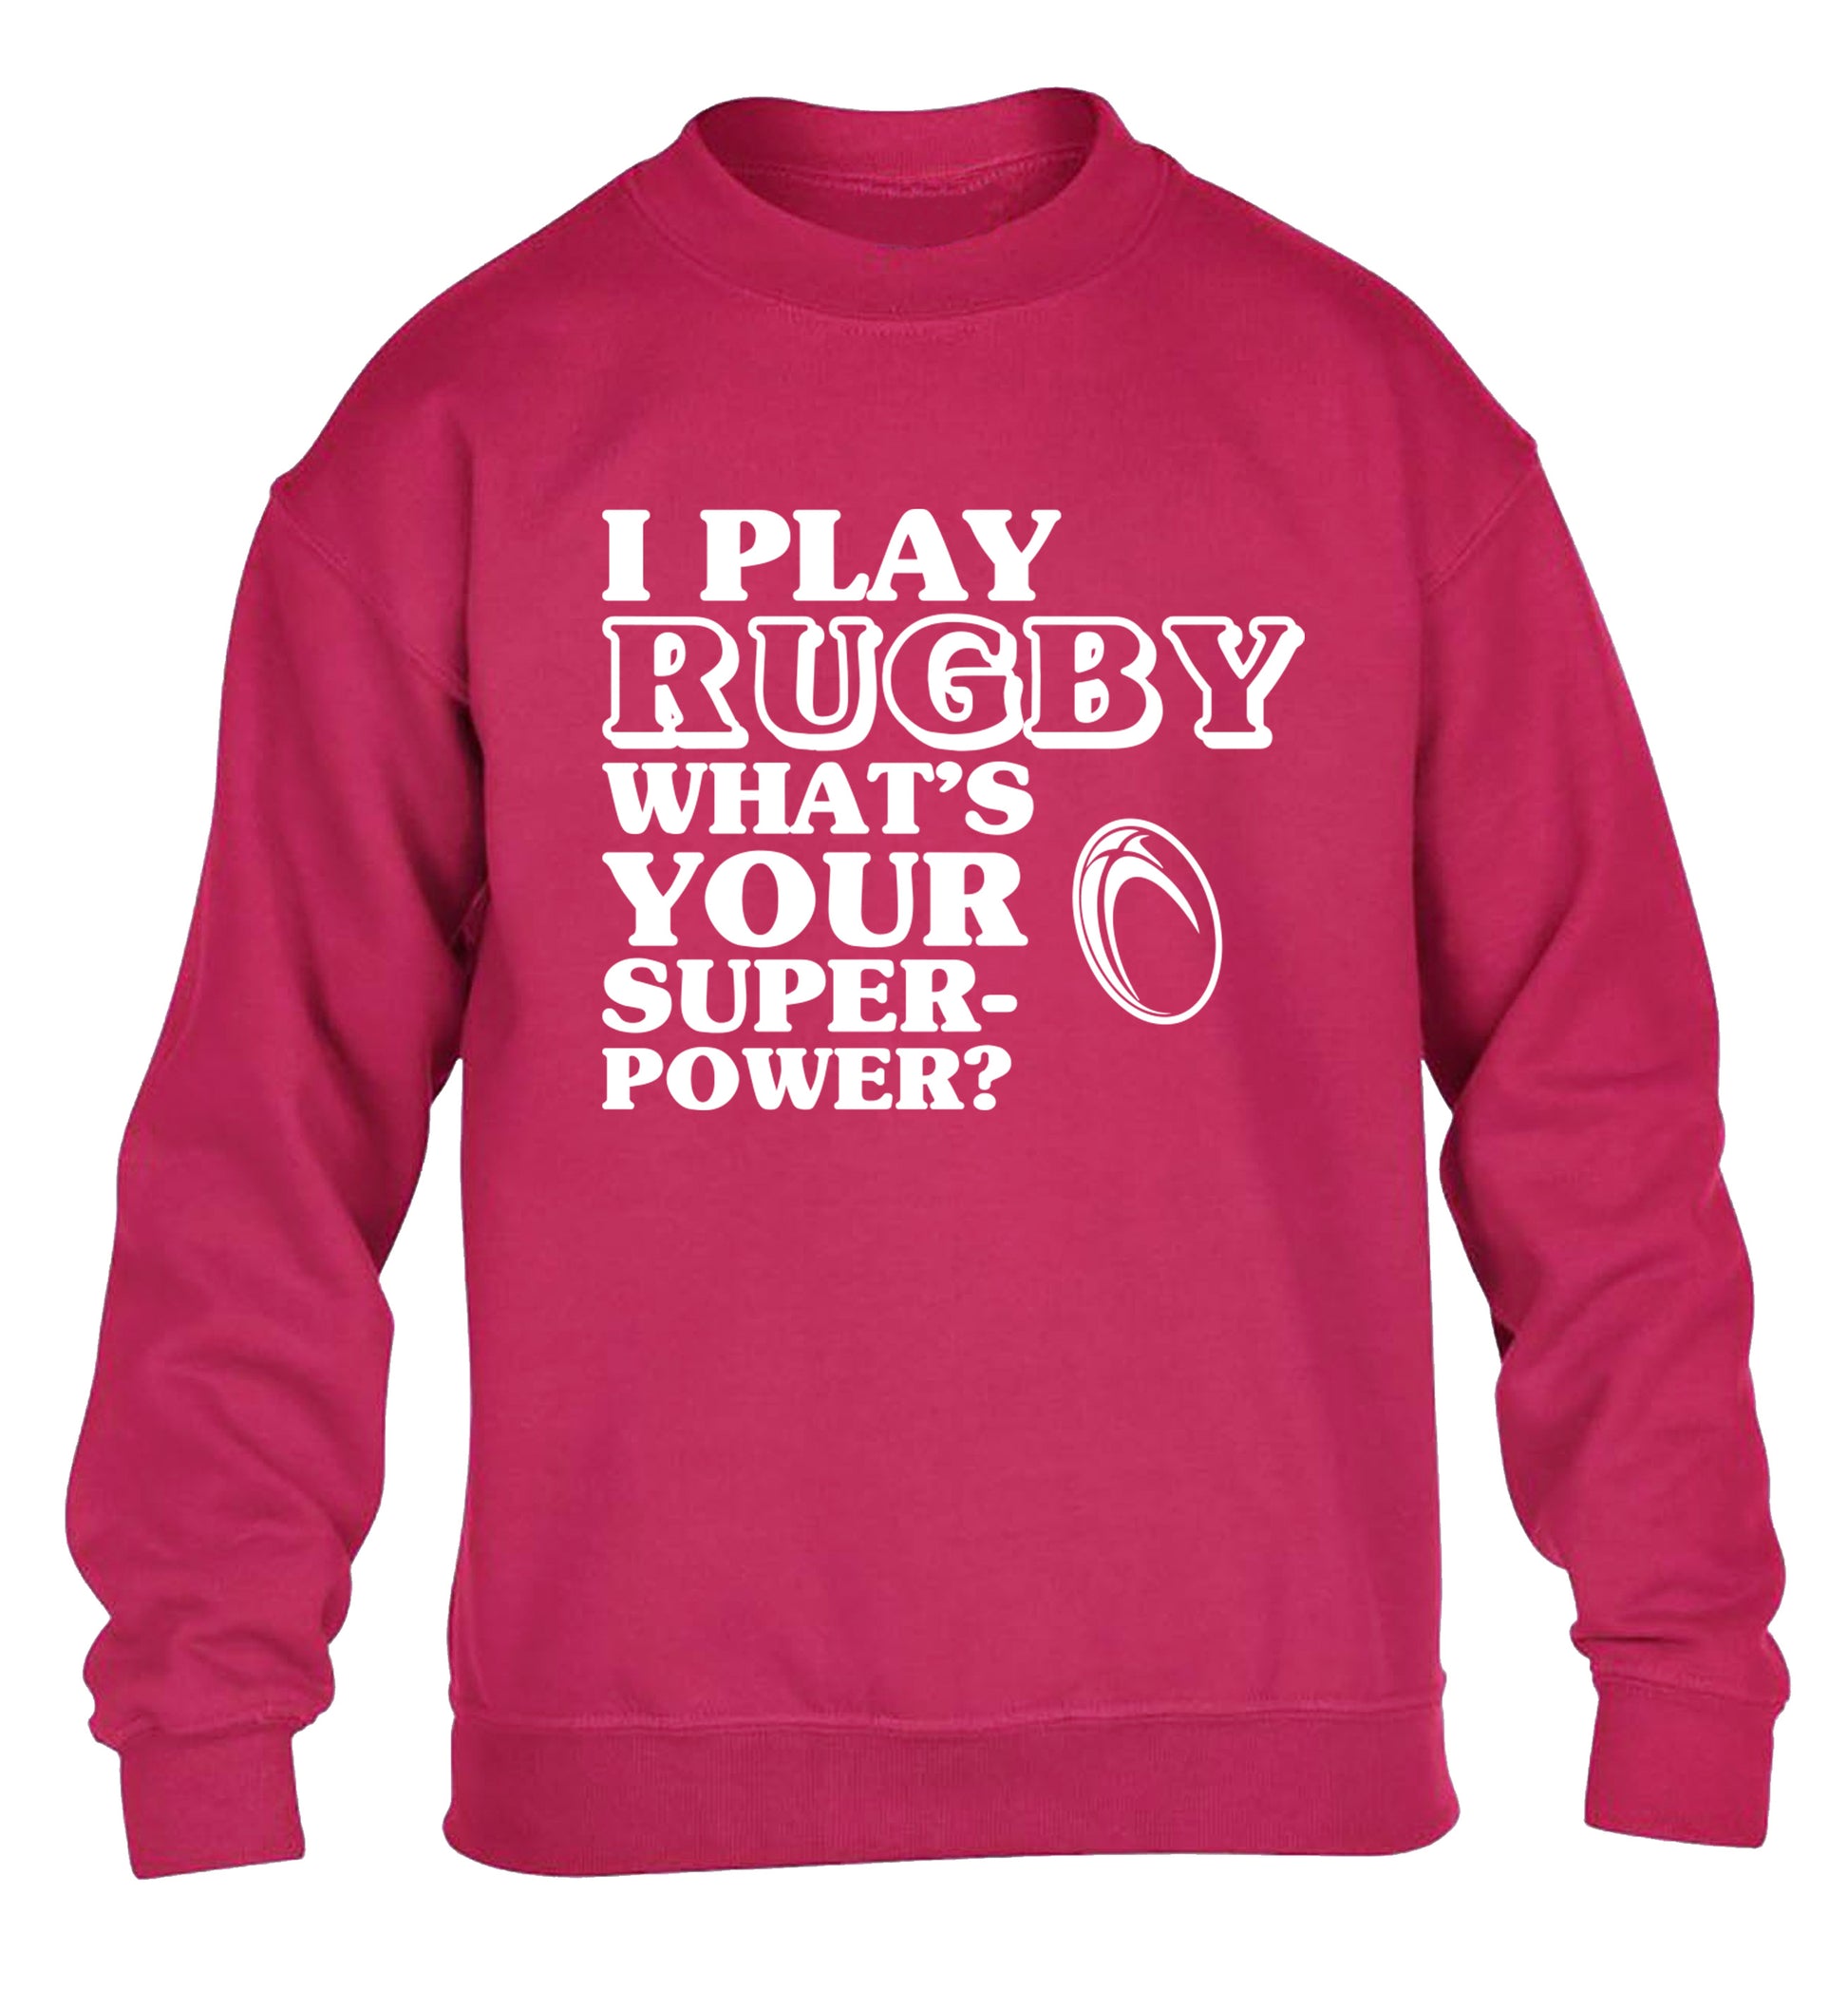 I play rugby what's your superpower? children's pink sweater 12-13 Years